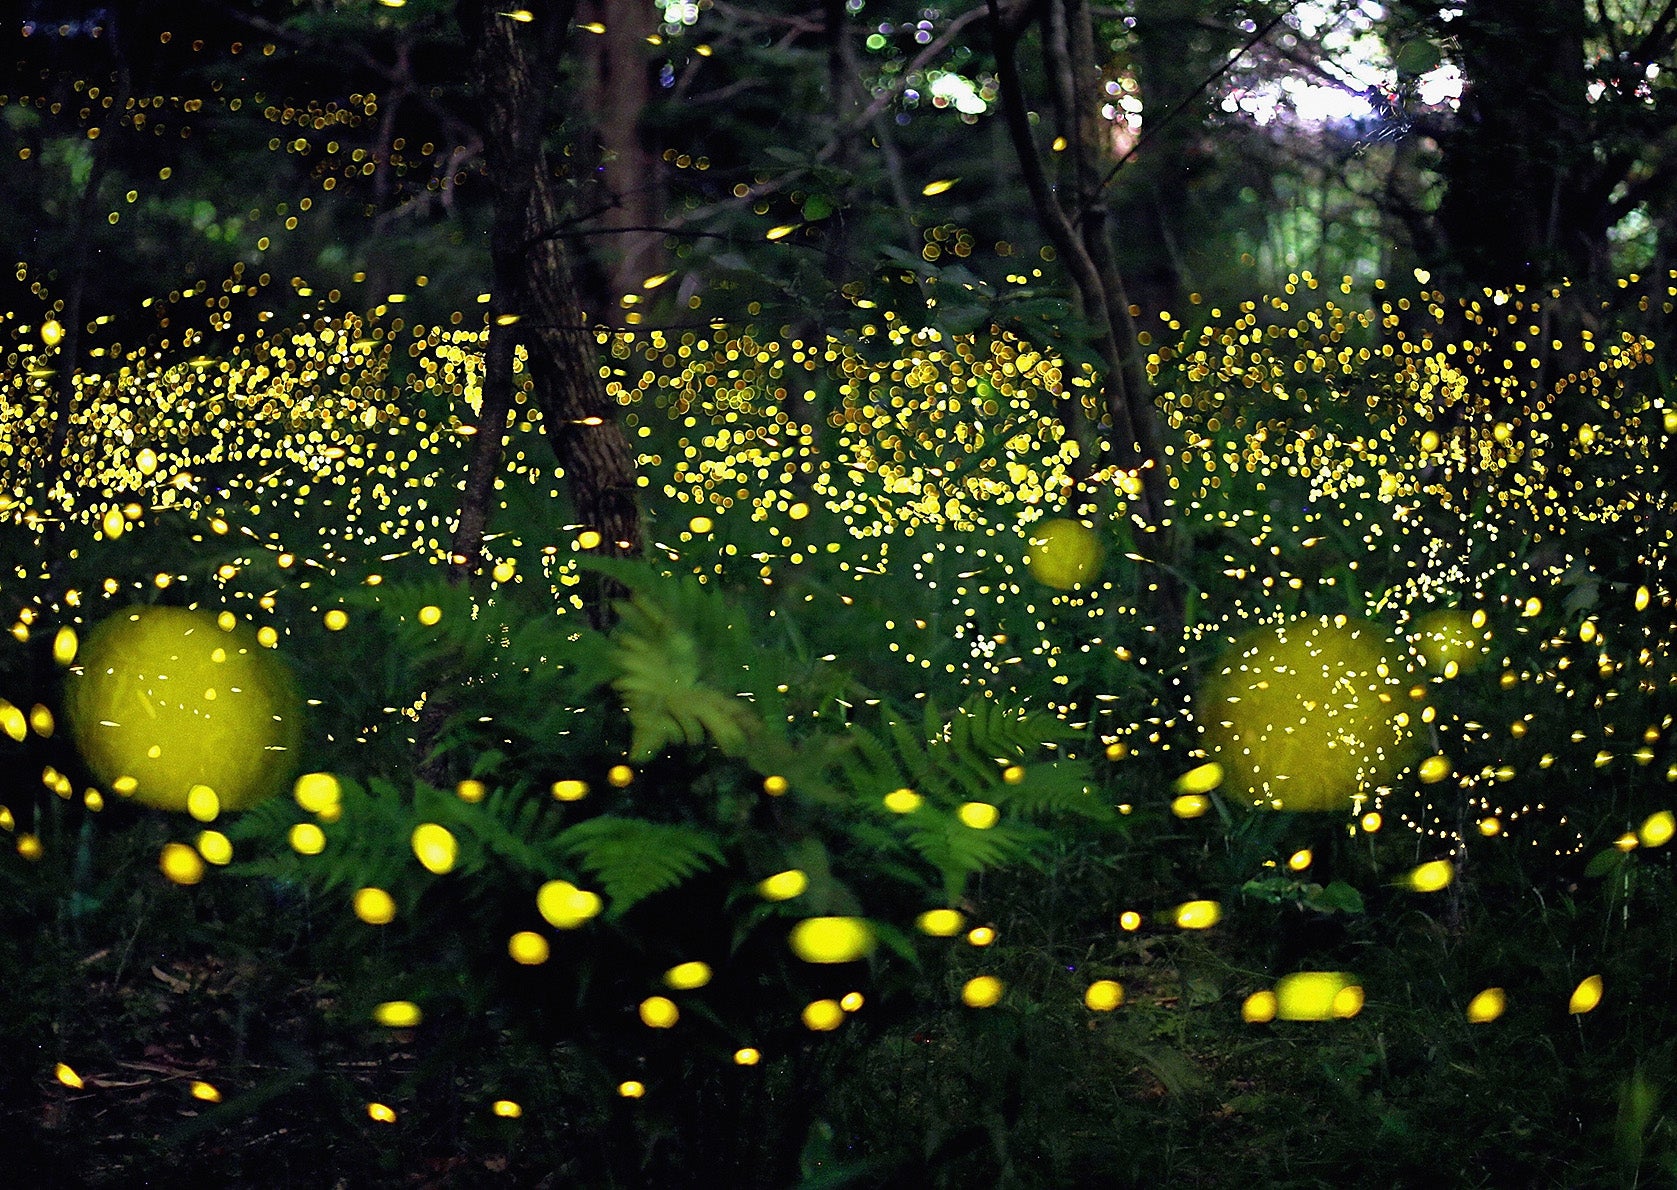 How and why do fireflies light up? - Scientific American